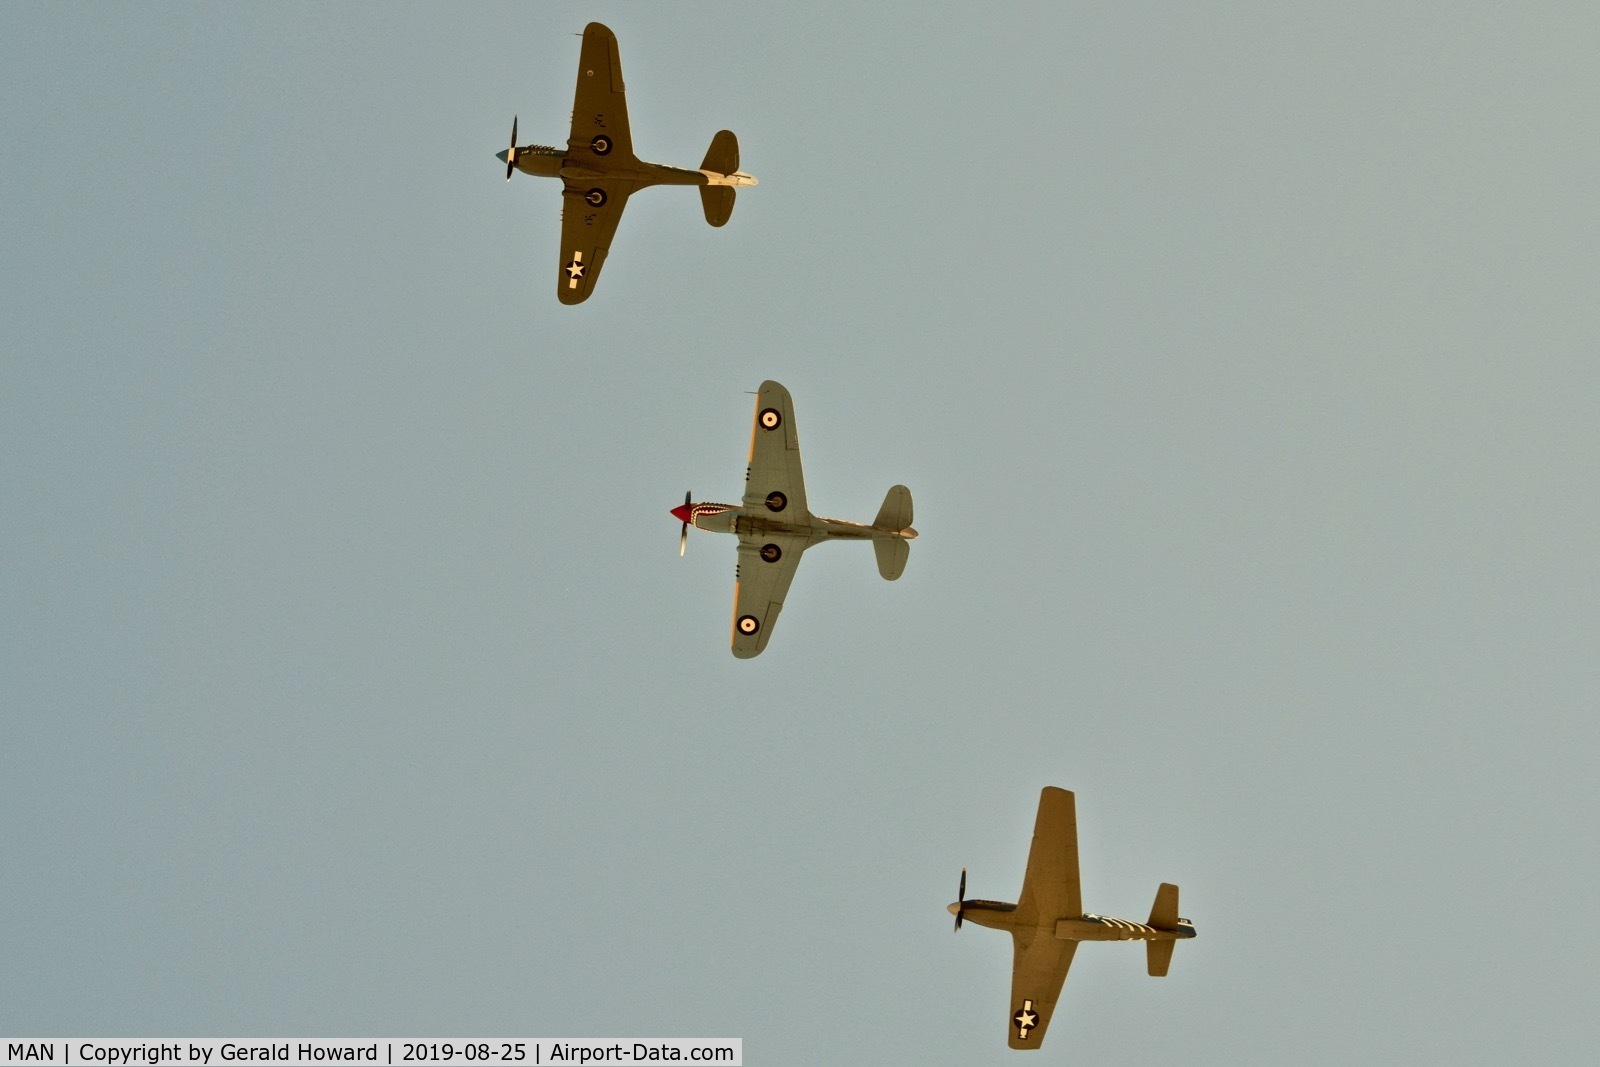 Nampa Municipal Airport (MAN) - P-40s and P-51 over fly MAN during airshow.